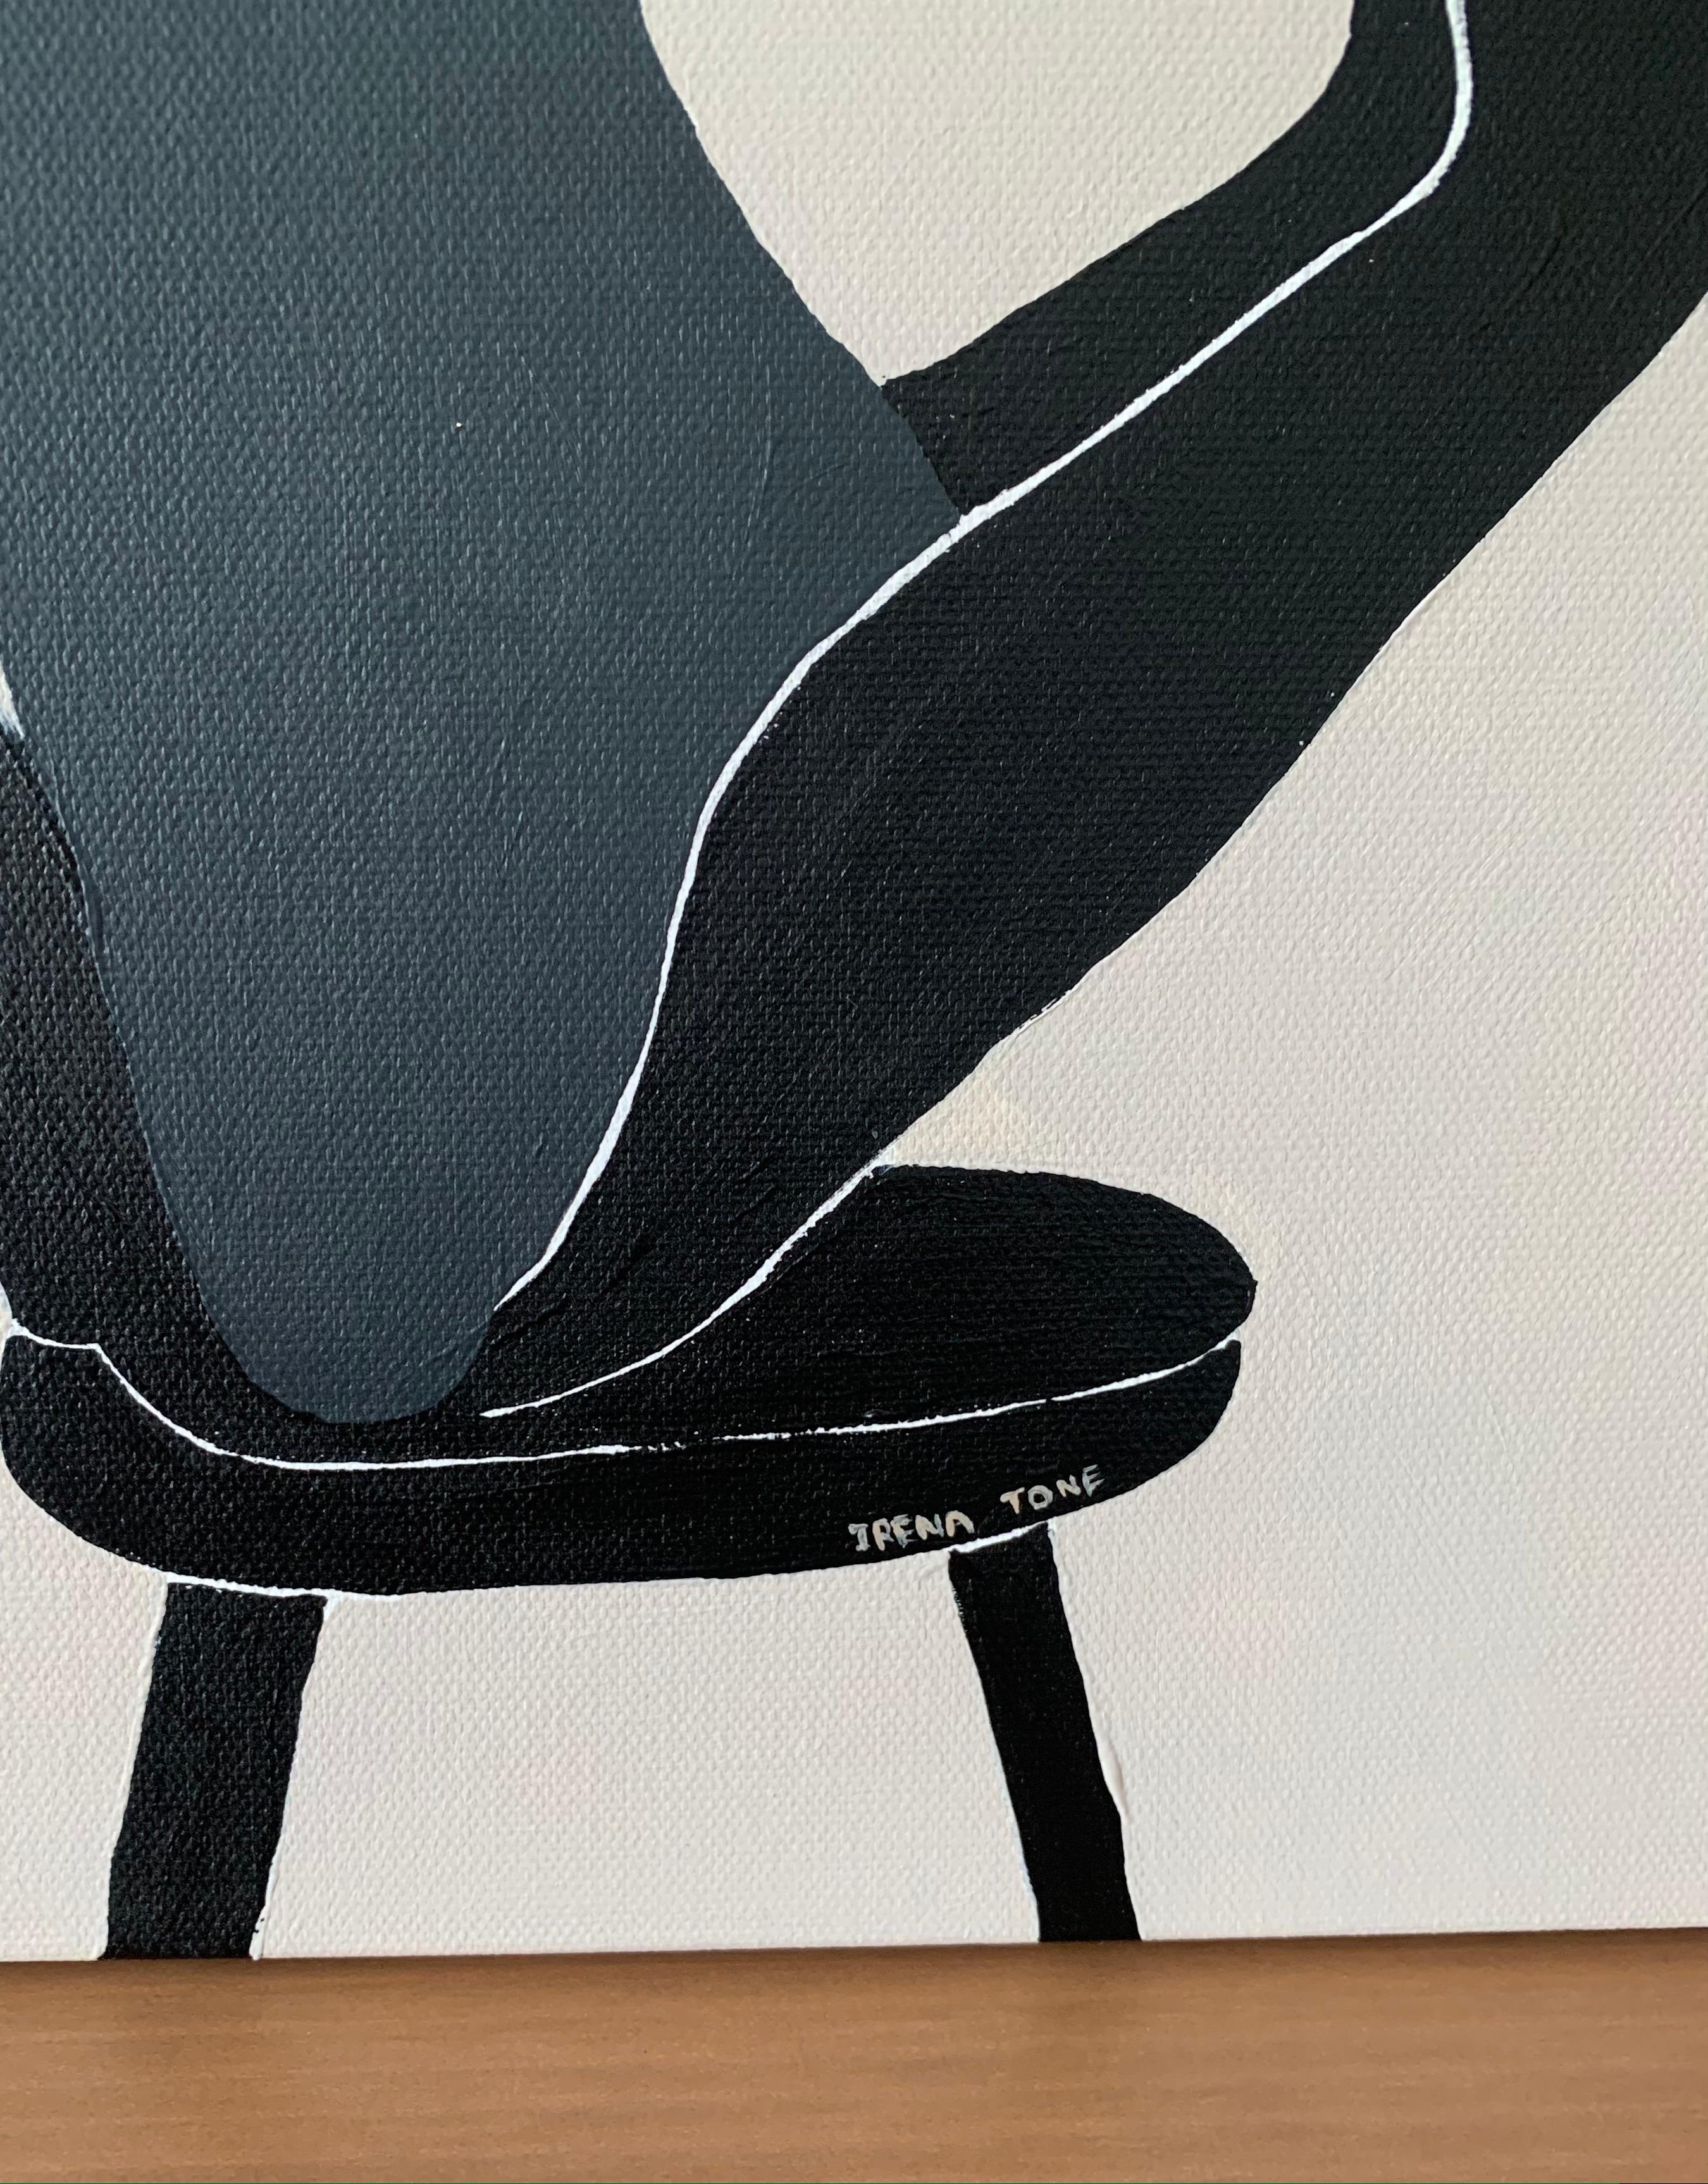 Beige: stool, abstract minimalist woman portrait in beige and black colors 1